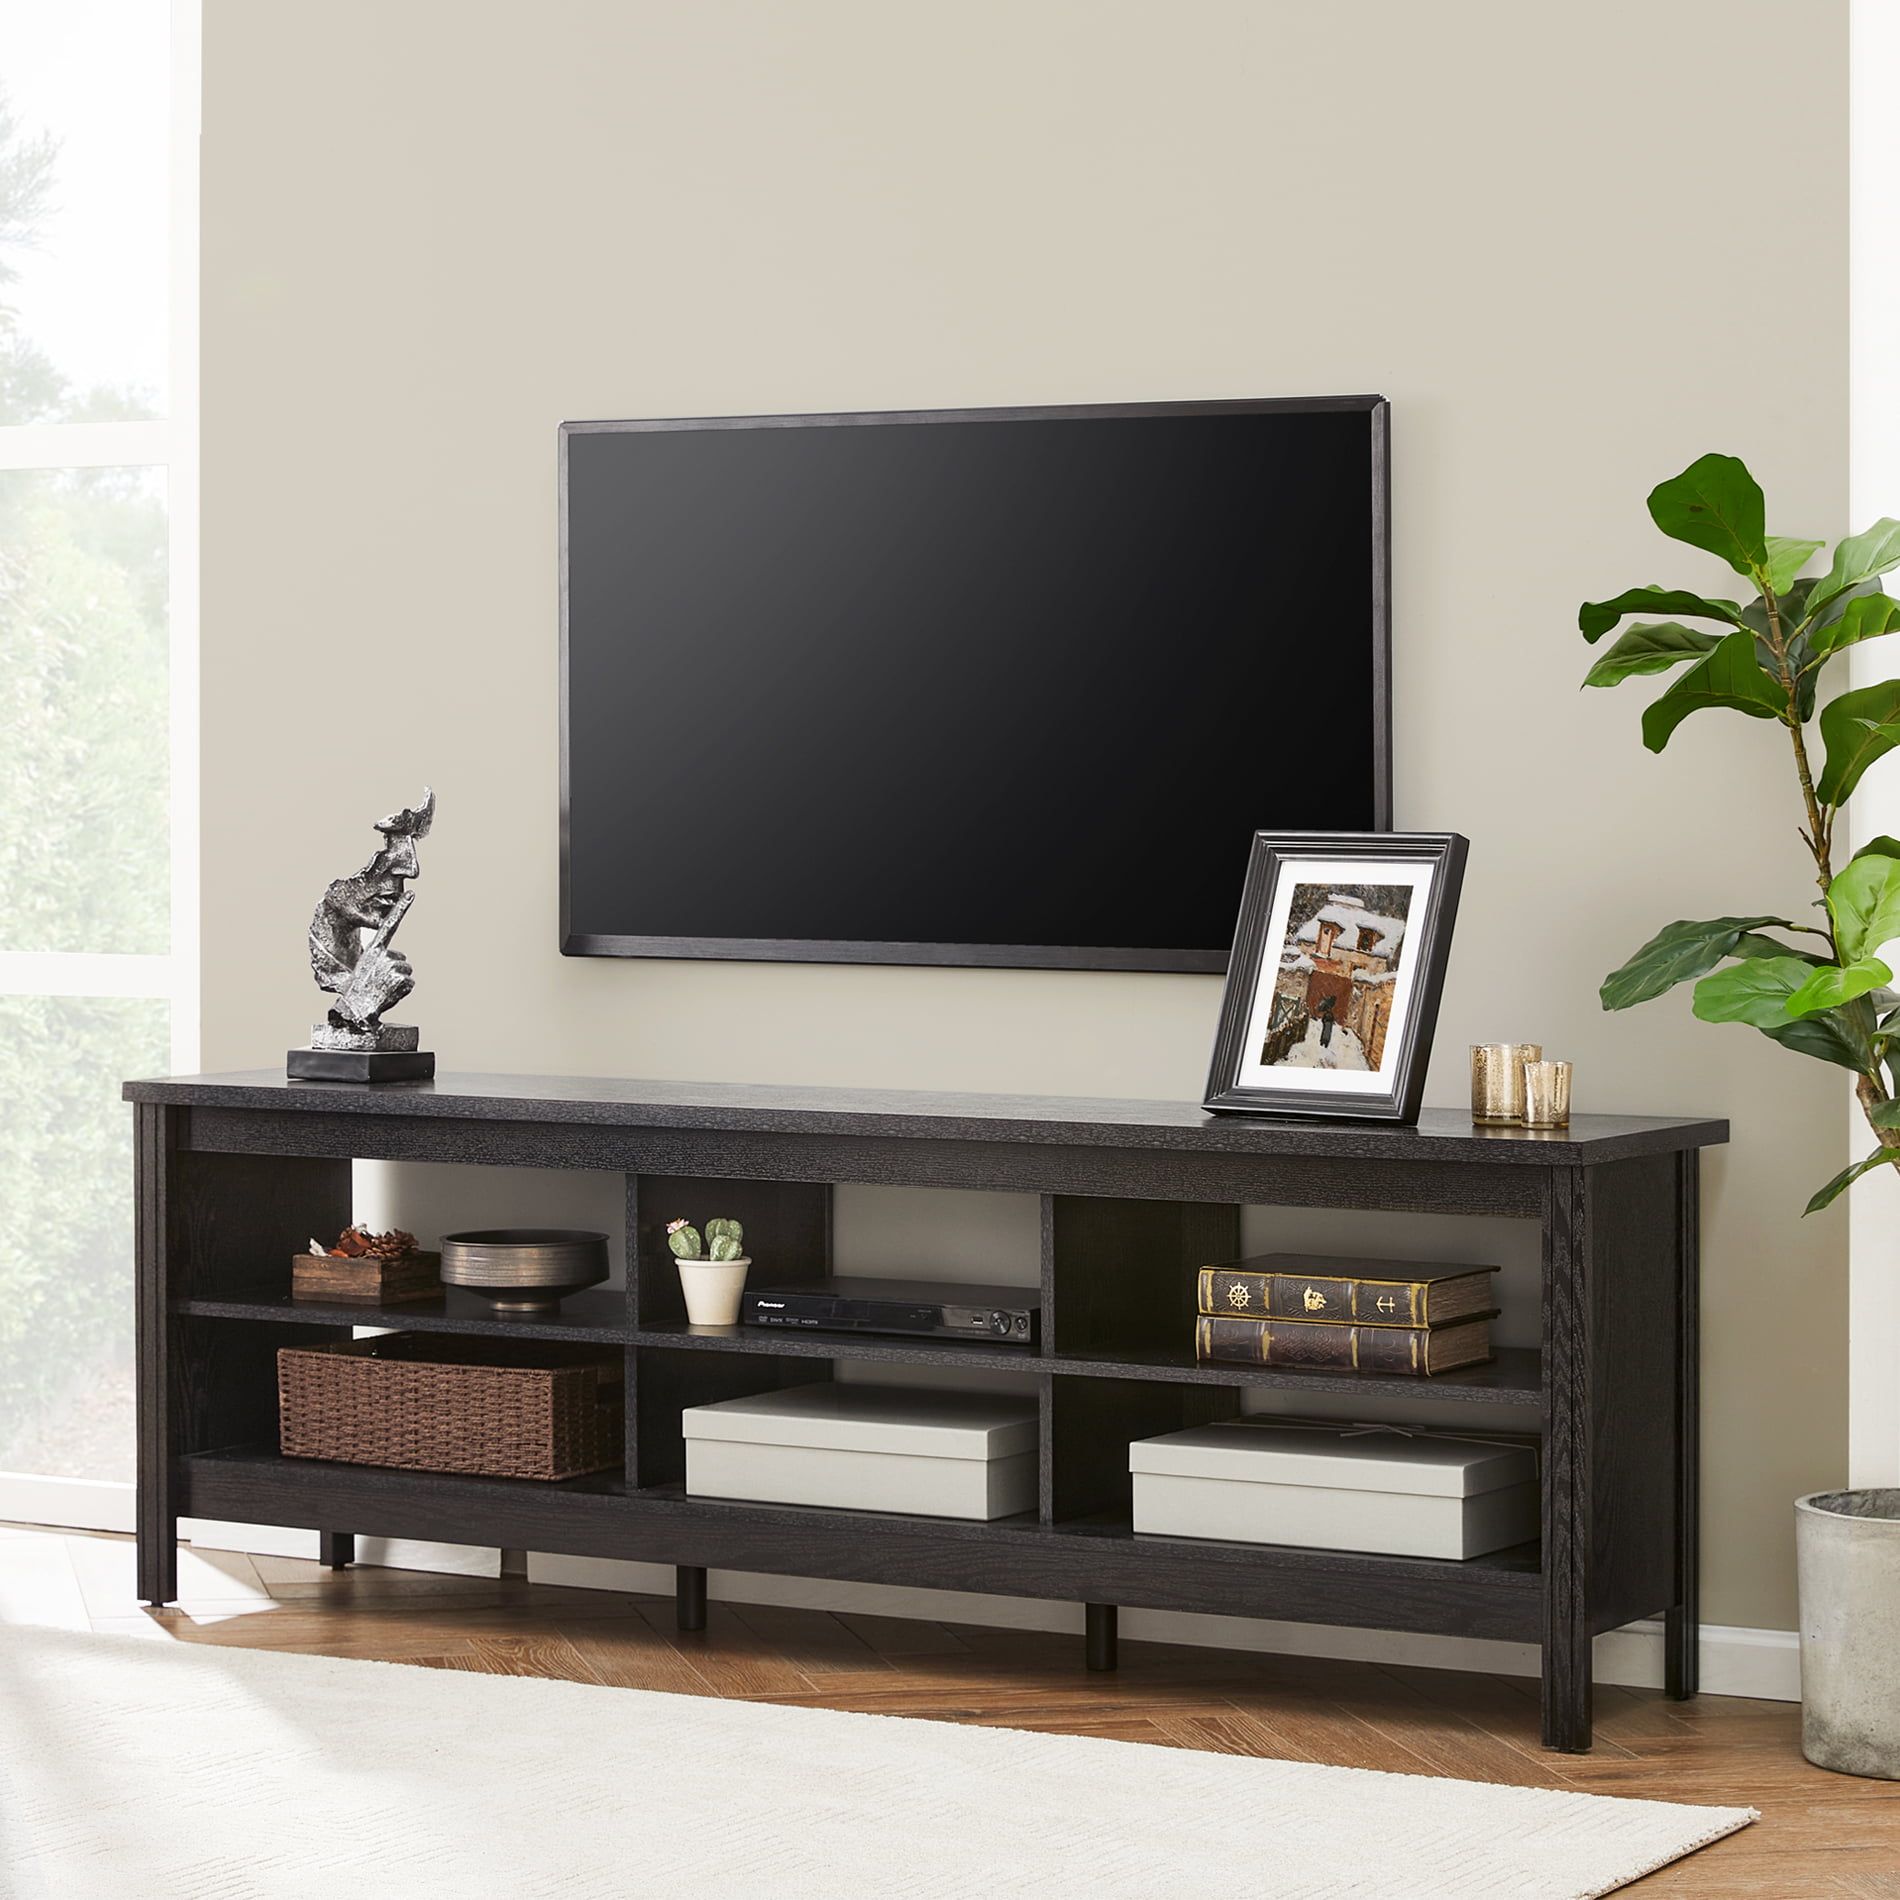 Farmhouse Tv Stands For 75 Inch Flat Screen Media Console Storage Intended For Media Entertainment Center Tv Stands (View 4 of 20)